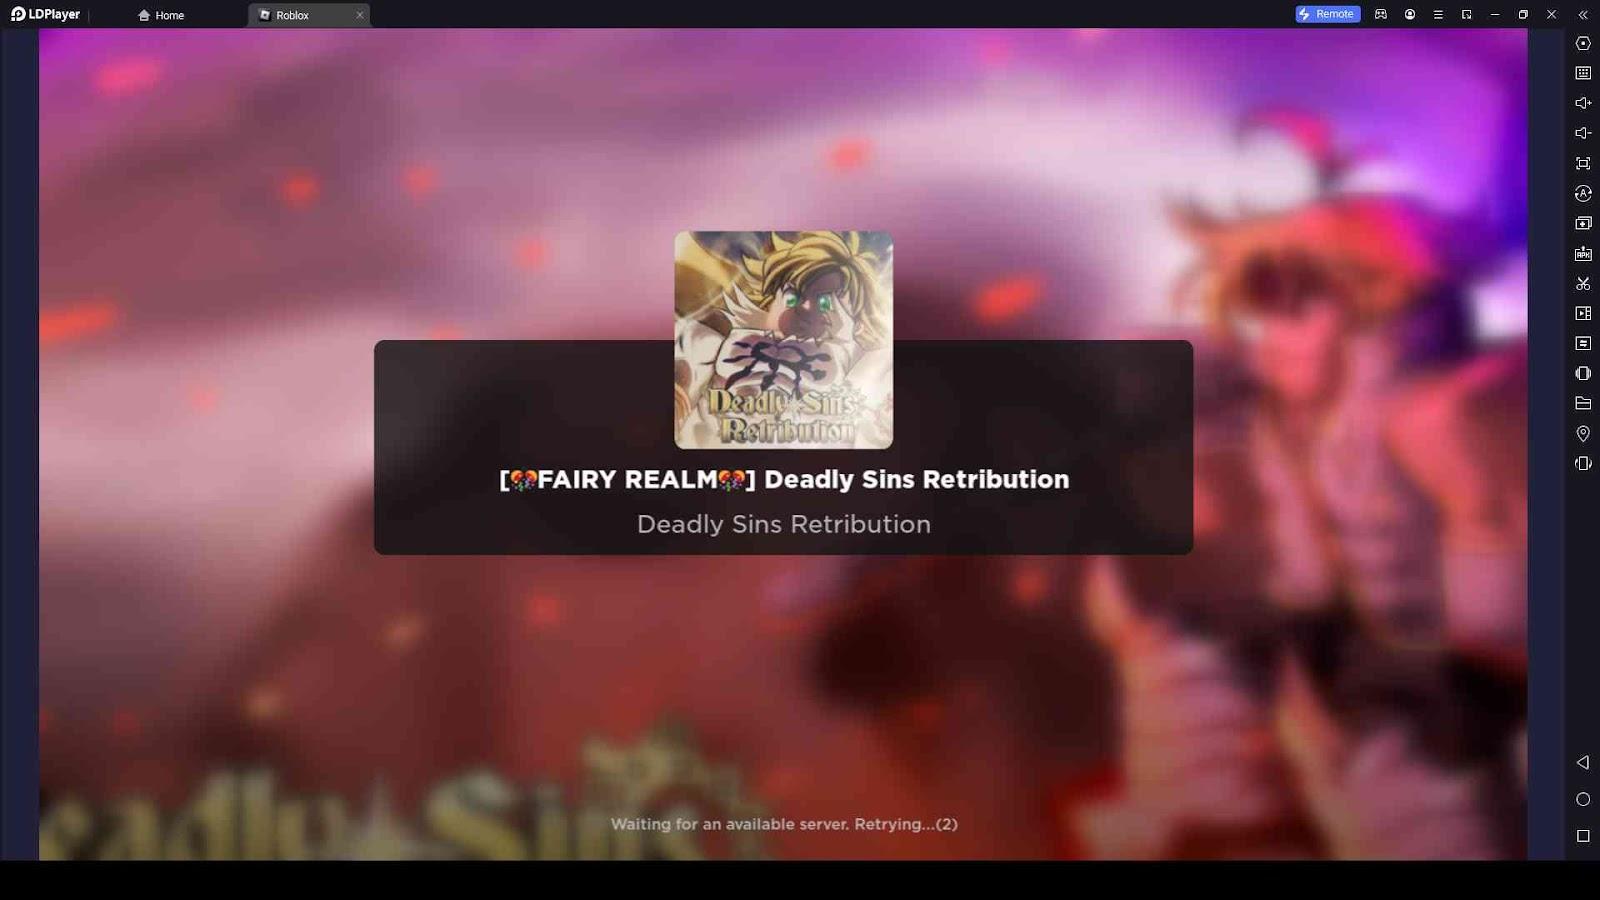 NEW* All Codes for Deadly Sins Retribution